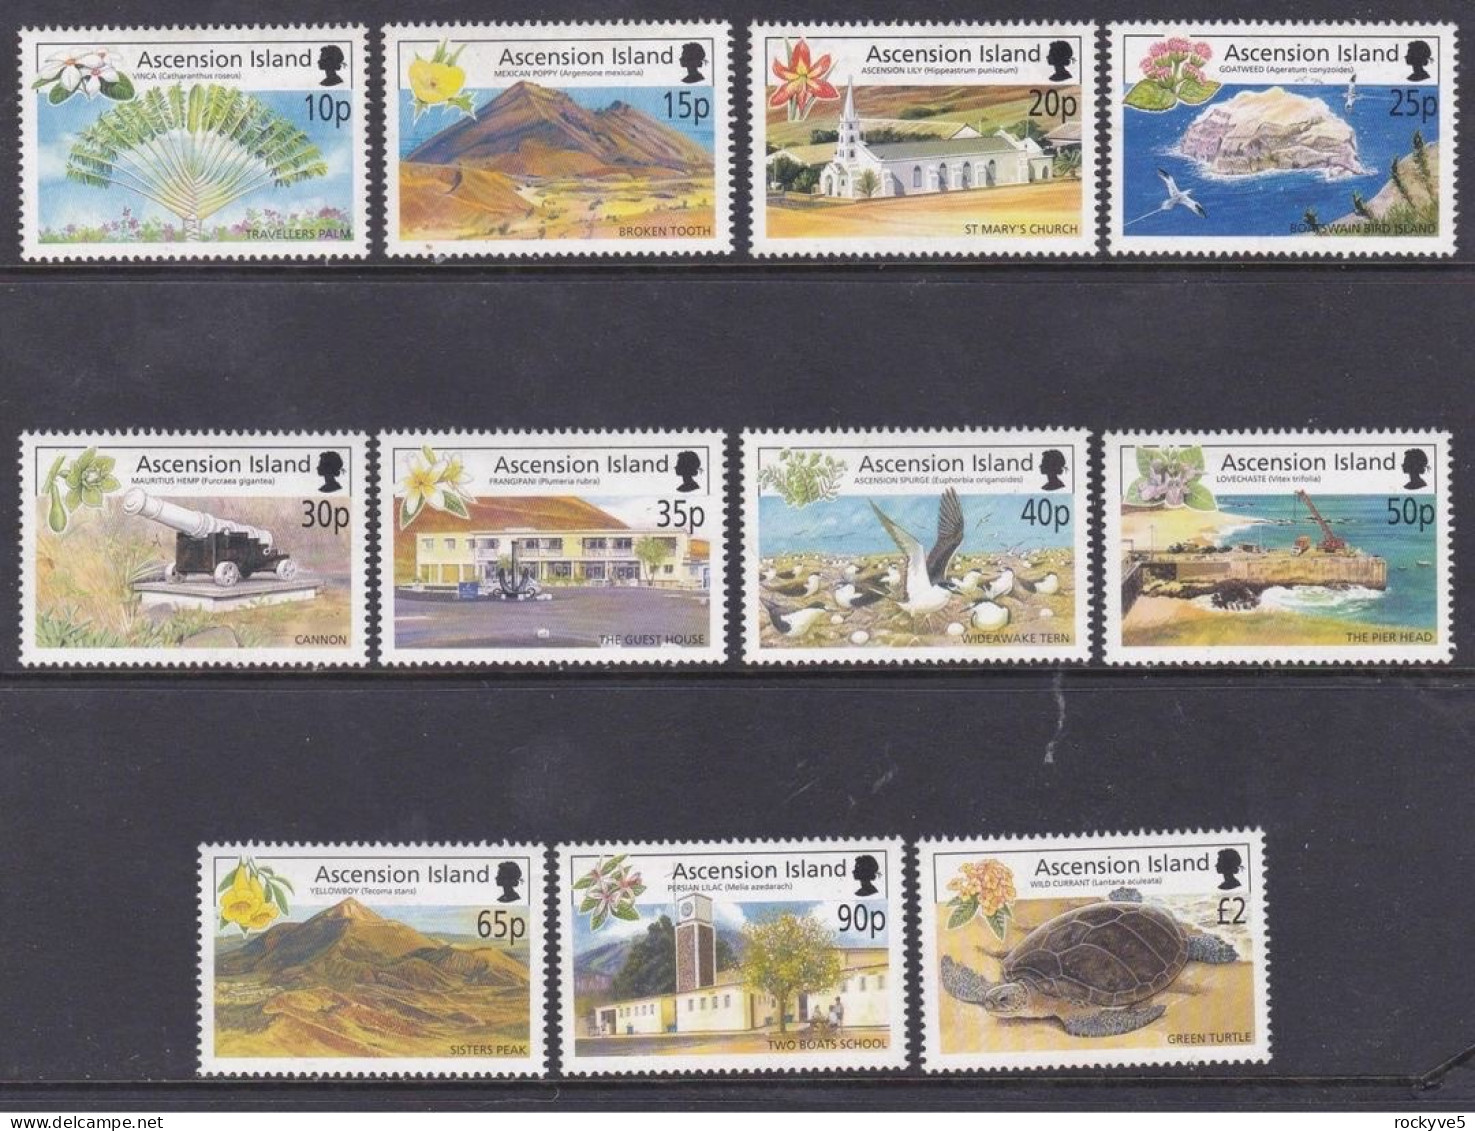 Ascension Island 2002 Island Views Definitives To £2 MNH CV £28 SP £9.99 - Ascensione